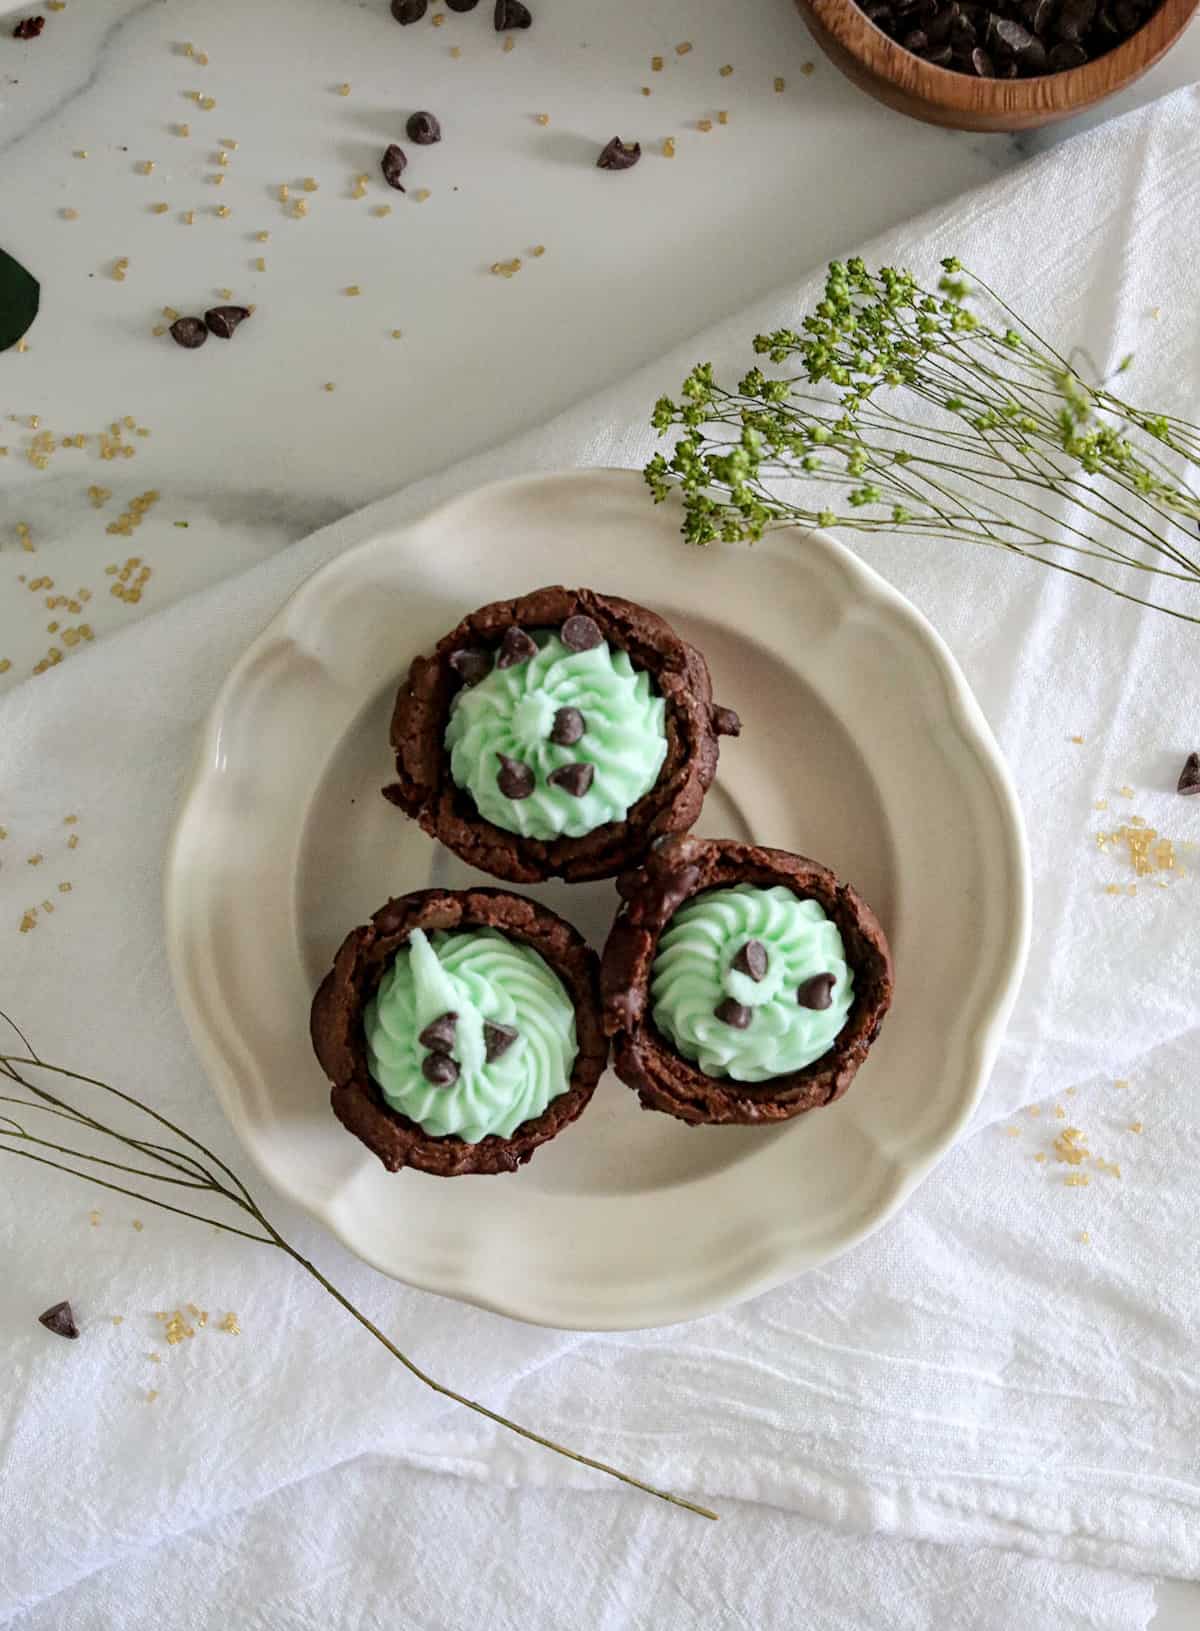 Three brownie bites with green buttercream filling on a white plate on a white tablecloth.